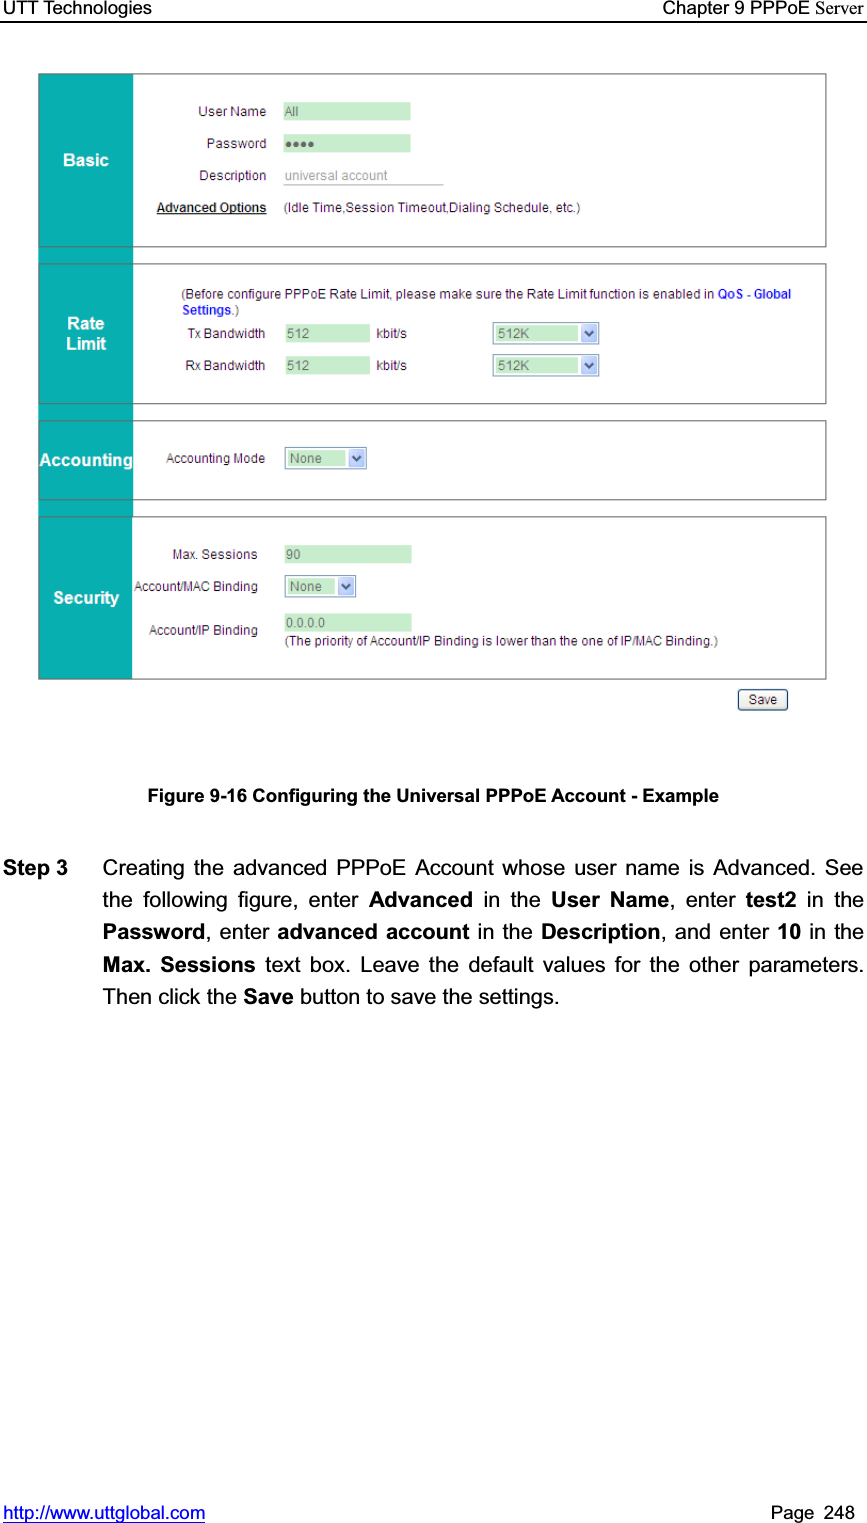 UTT Technologies    Chapter 9 PPPoE Serverhttp://www.uttglobal.com Page 248 Figure 9-16 Configuring the Universal PPPoE Account - Example Step 3  Creating the advanced PPPoE Account whose user name is Advanced. See the following figure, enter Advanced in the User Name, enter test2 in thePassword, enter advanced account in the Description, and enter 10 in theMax. Sessions text box. Leave the default values for the other parameters. Then click the Save button to save the settings.   